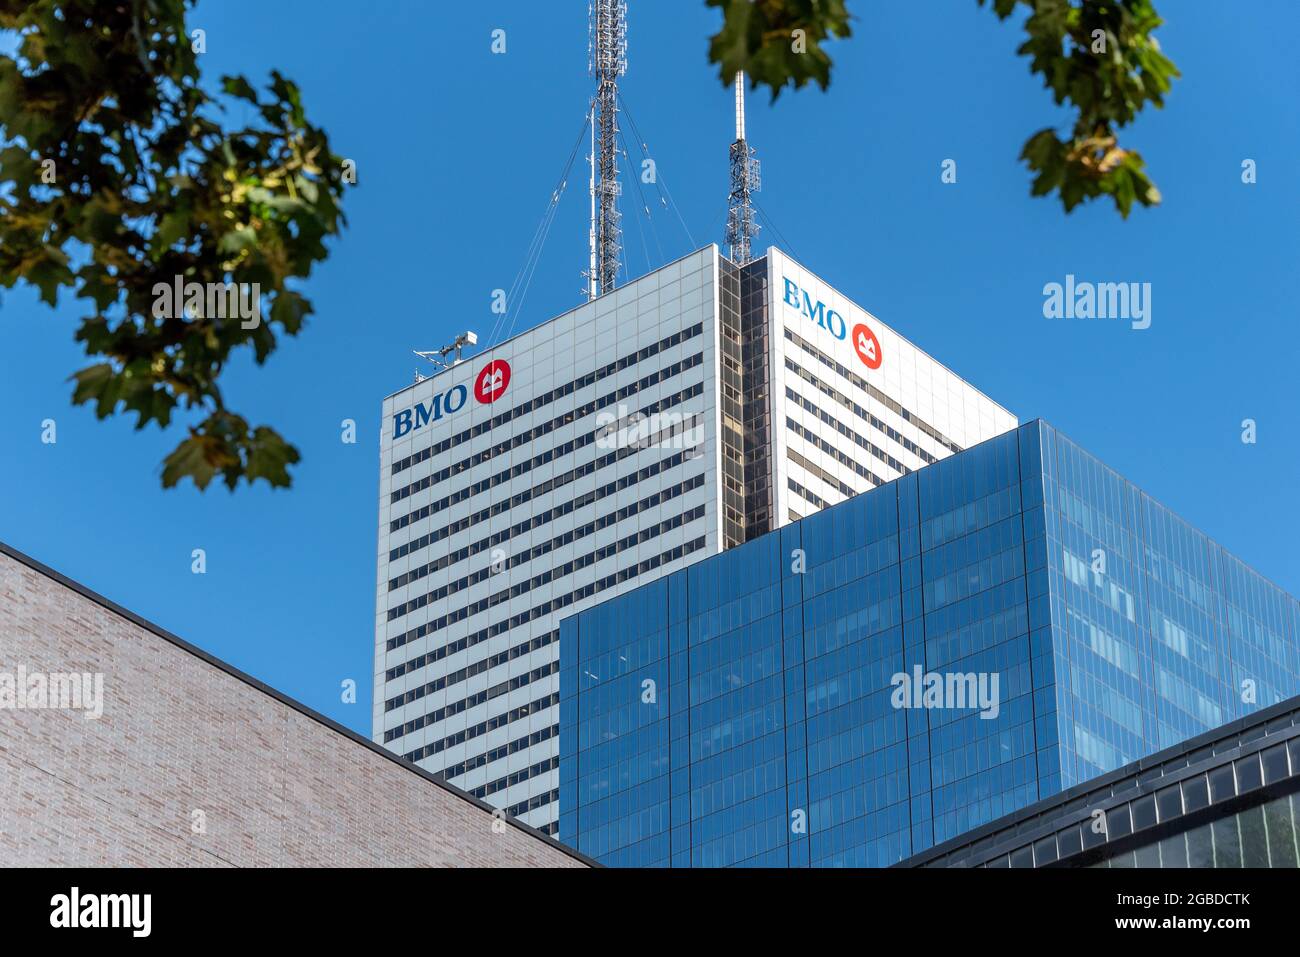 Bank of Montreal or BMO logo on top of a skyscraper tower in the financial district in Toronto, Canada Stock Photo